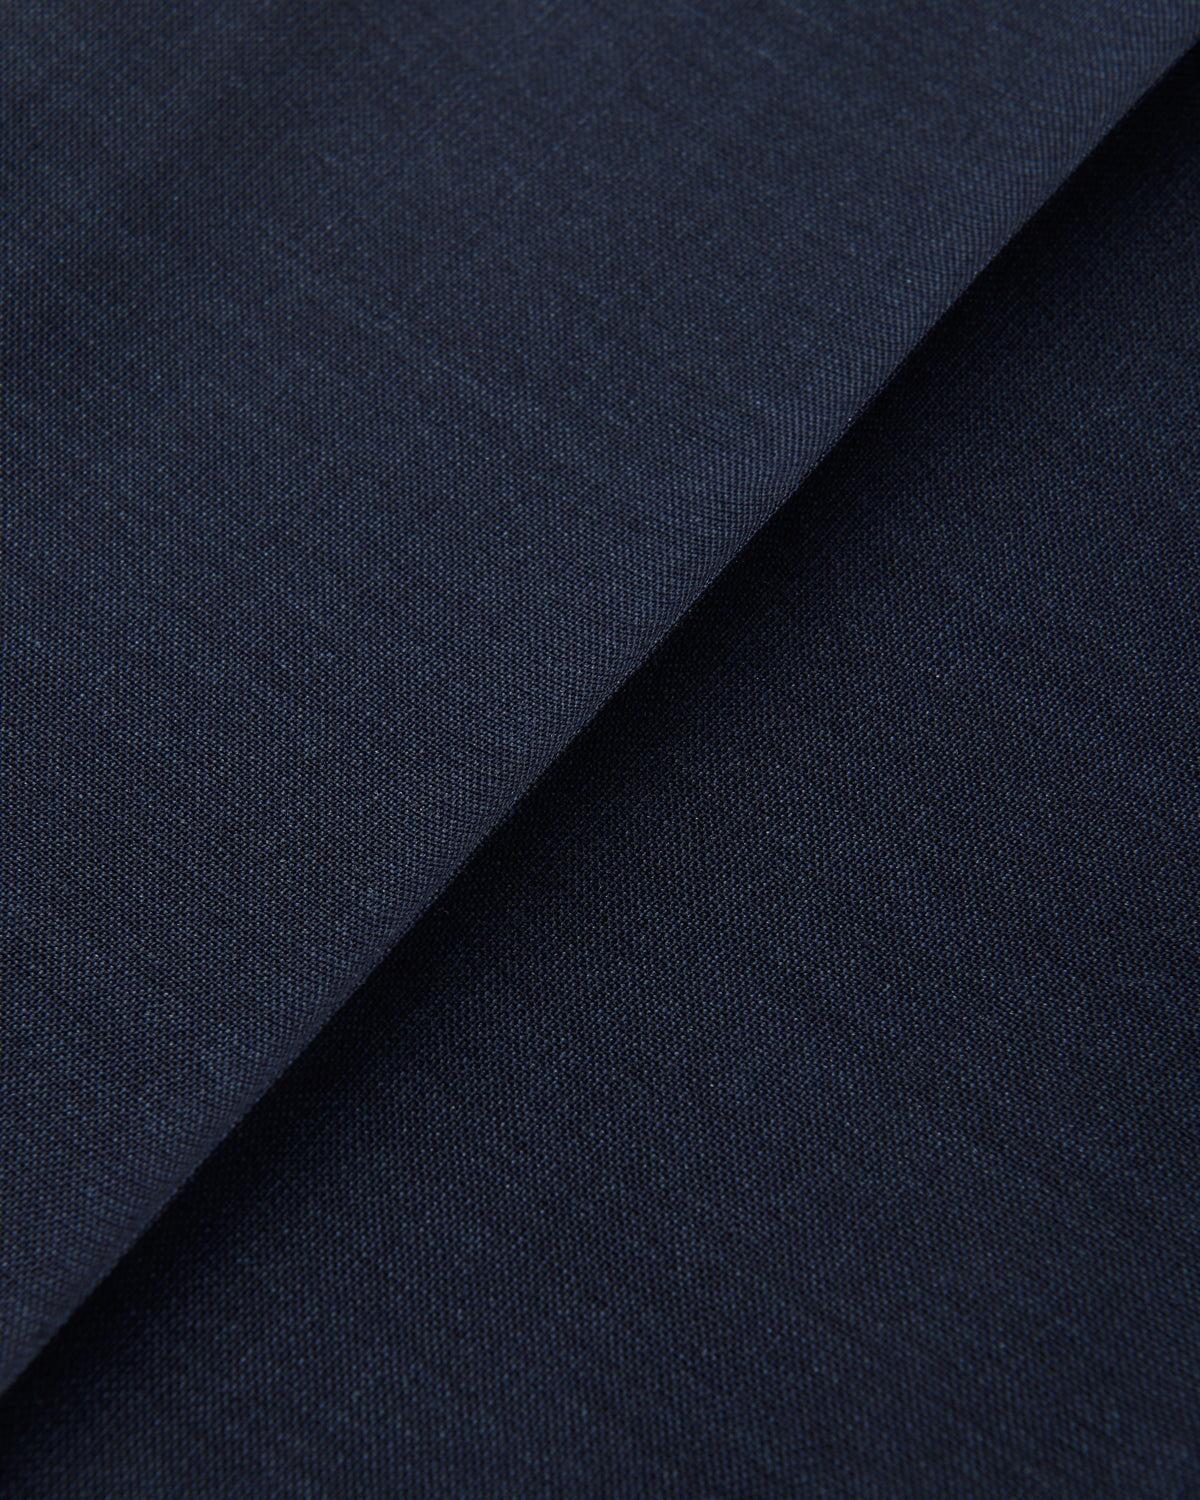 Kilgour Savile Row Tailoring SB1 KG Single Breasted Navy End on End Suit